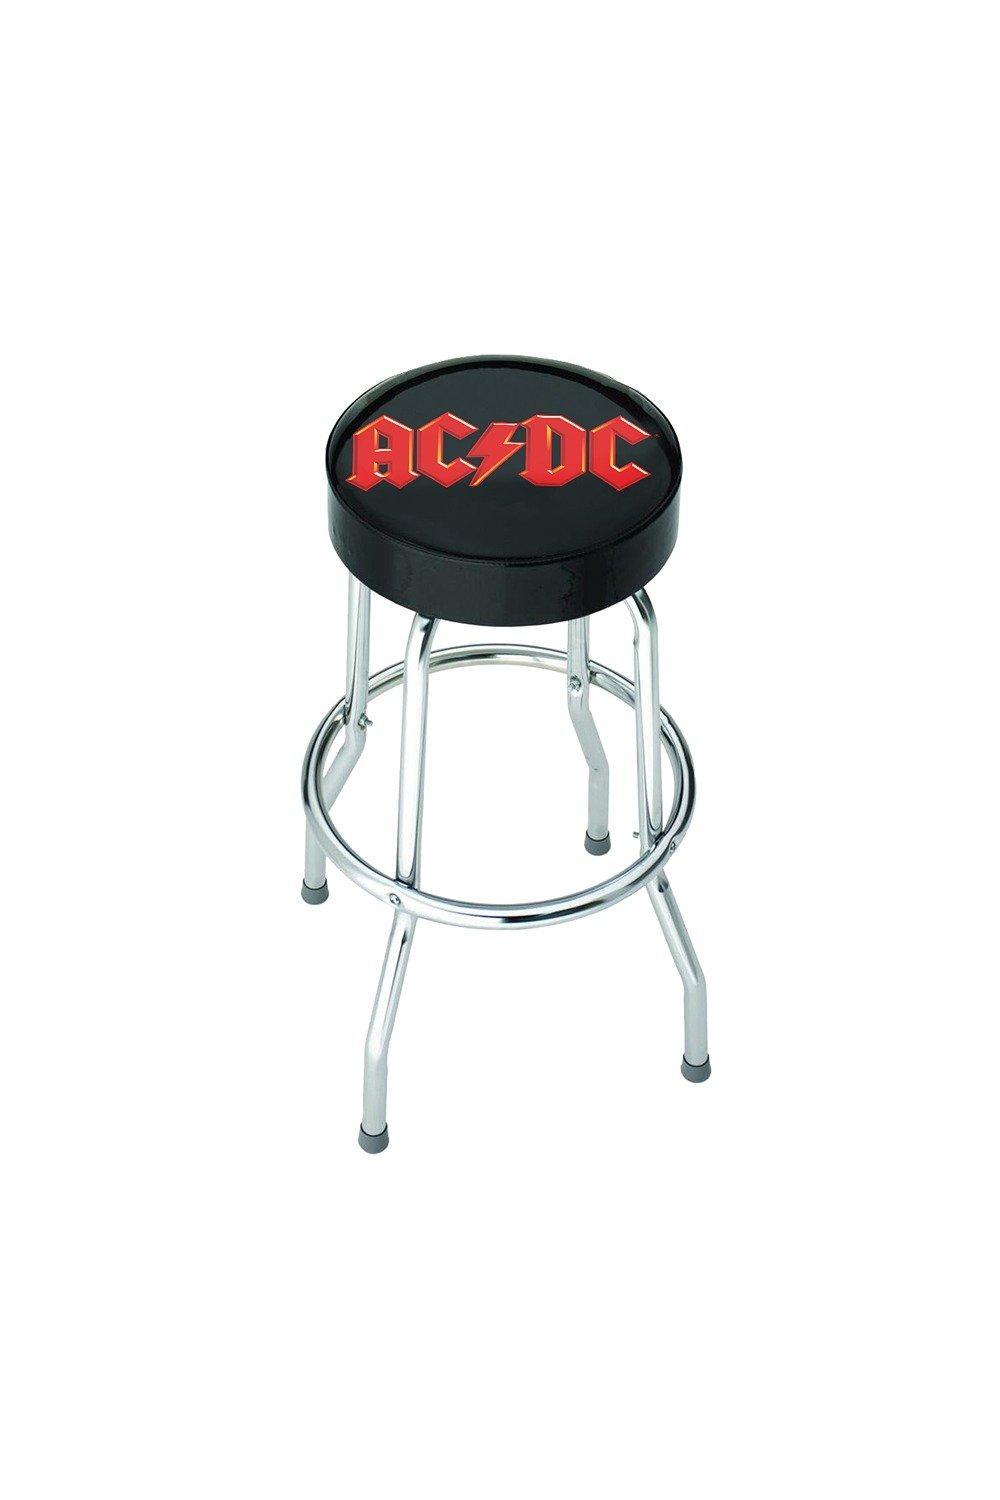 Megadeth Bar Stool - Rest In Peace